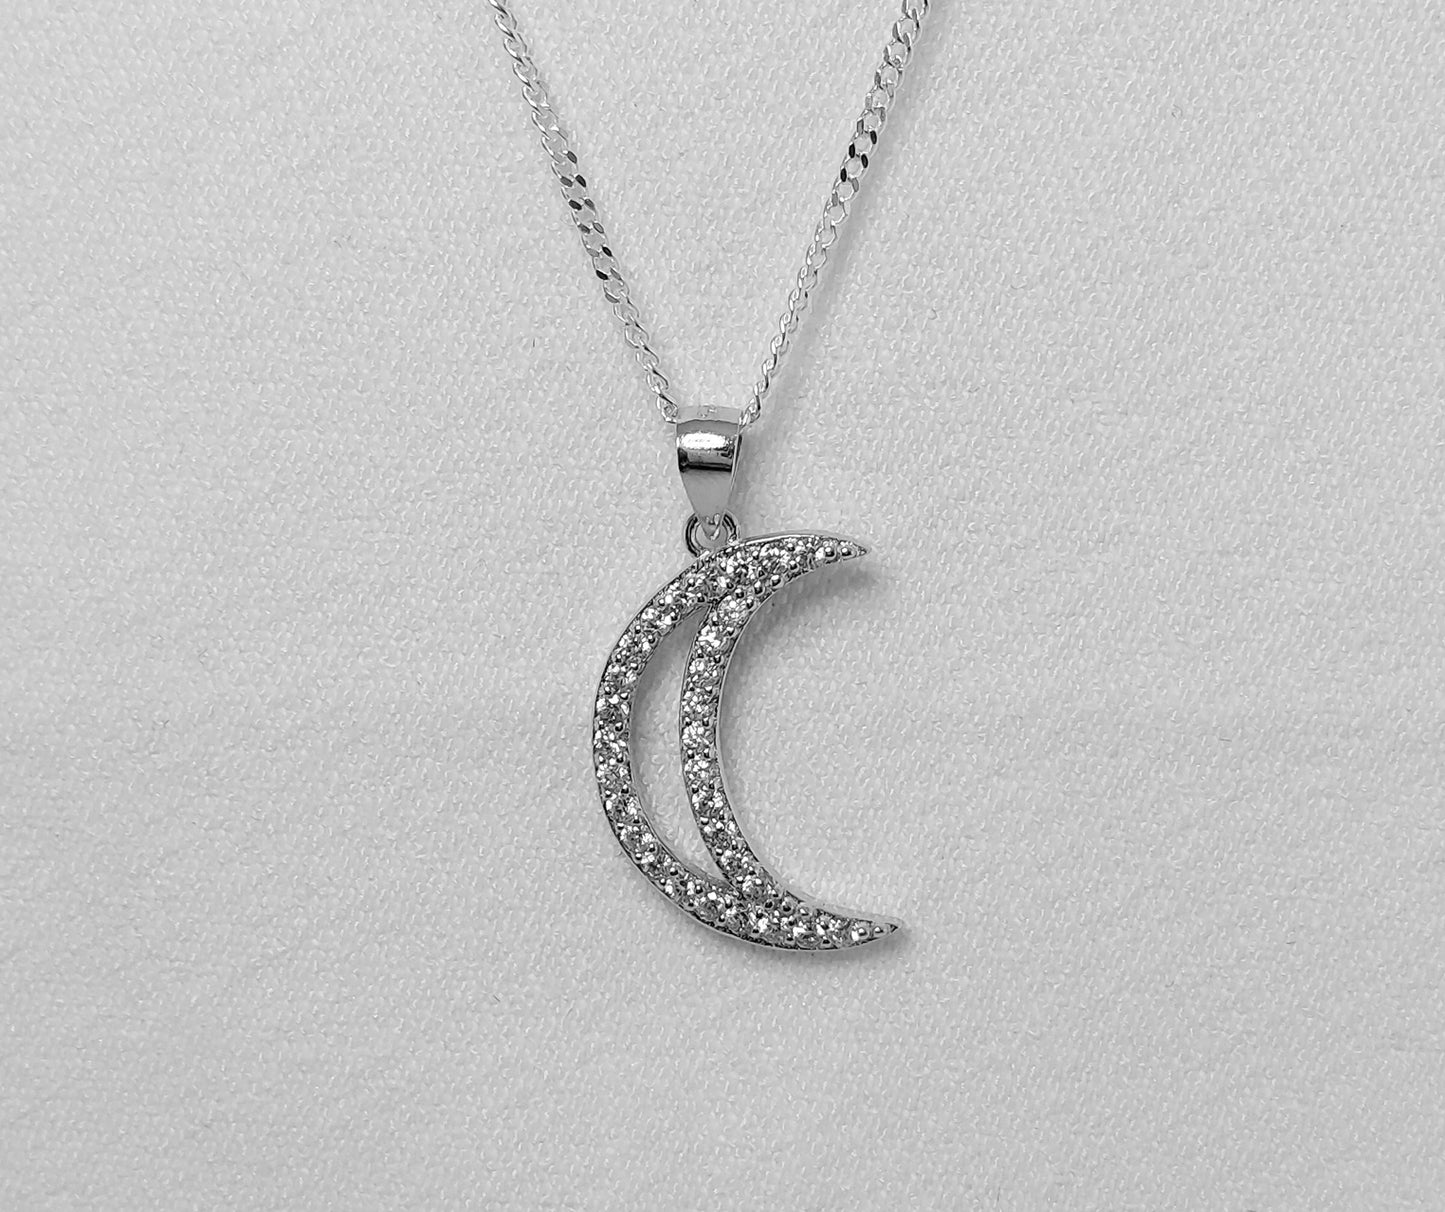 Sterling Silver Crescent Moon pendant with cubic zirconia stones